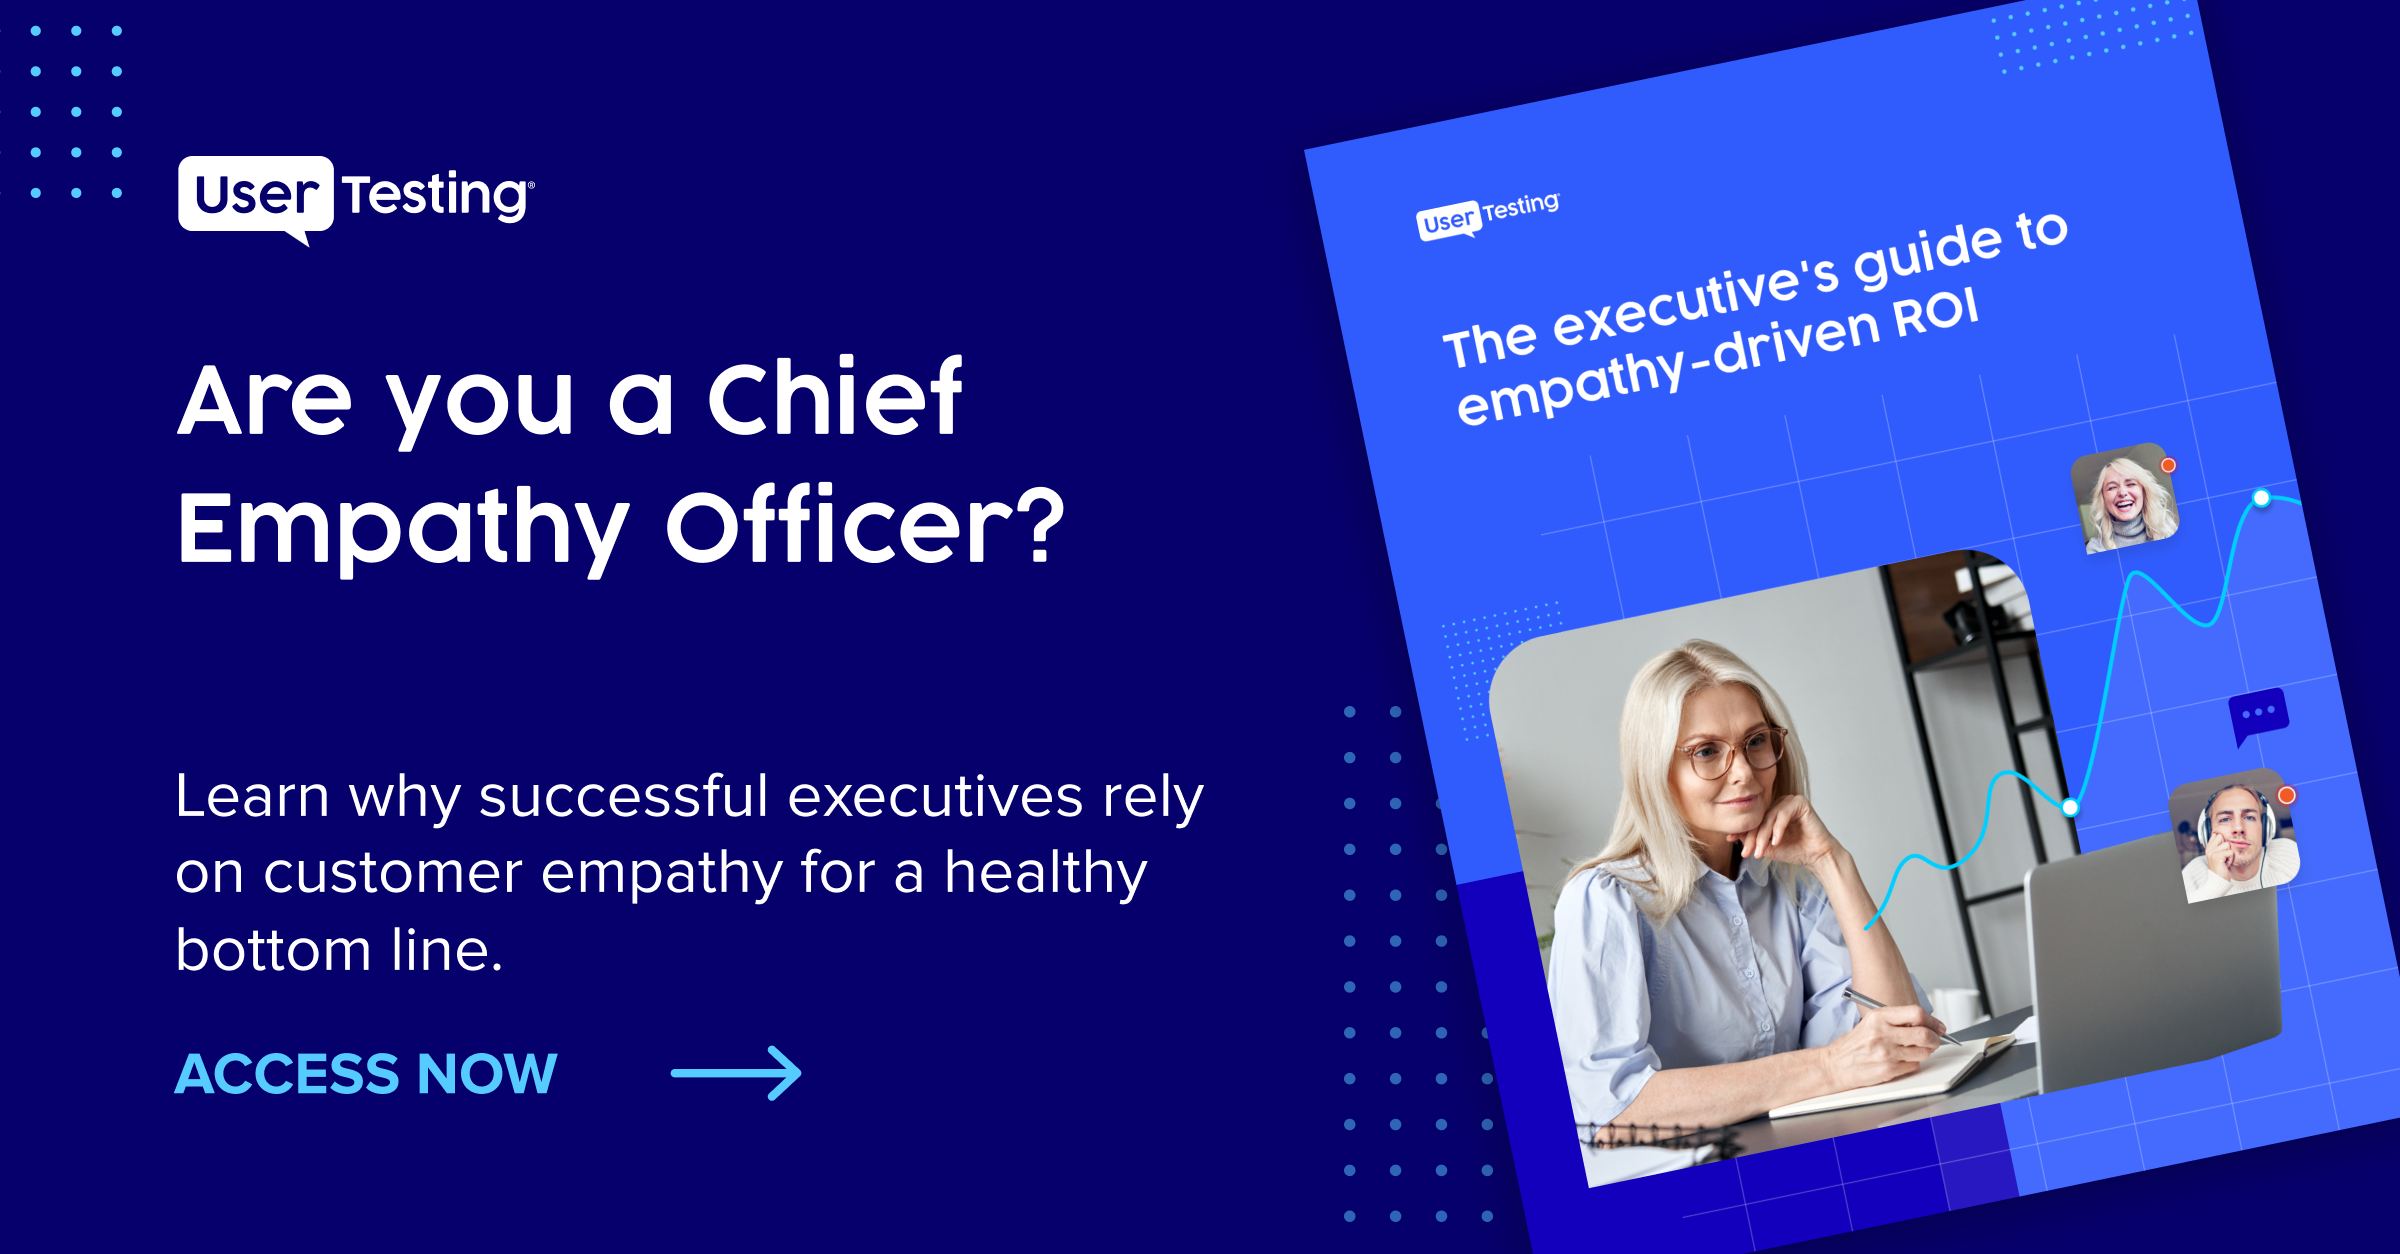 Are you a Chief Empathy Officer